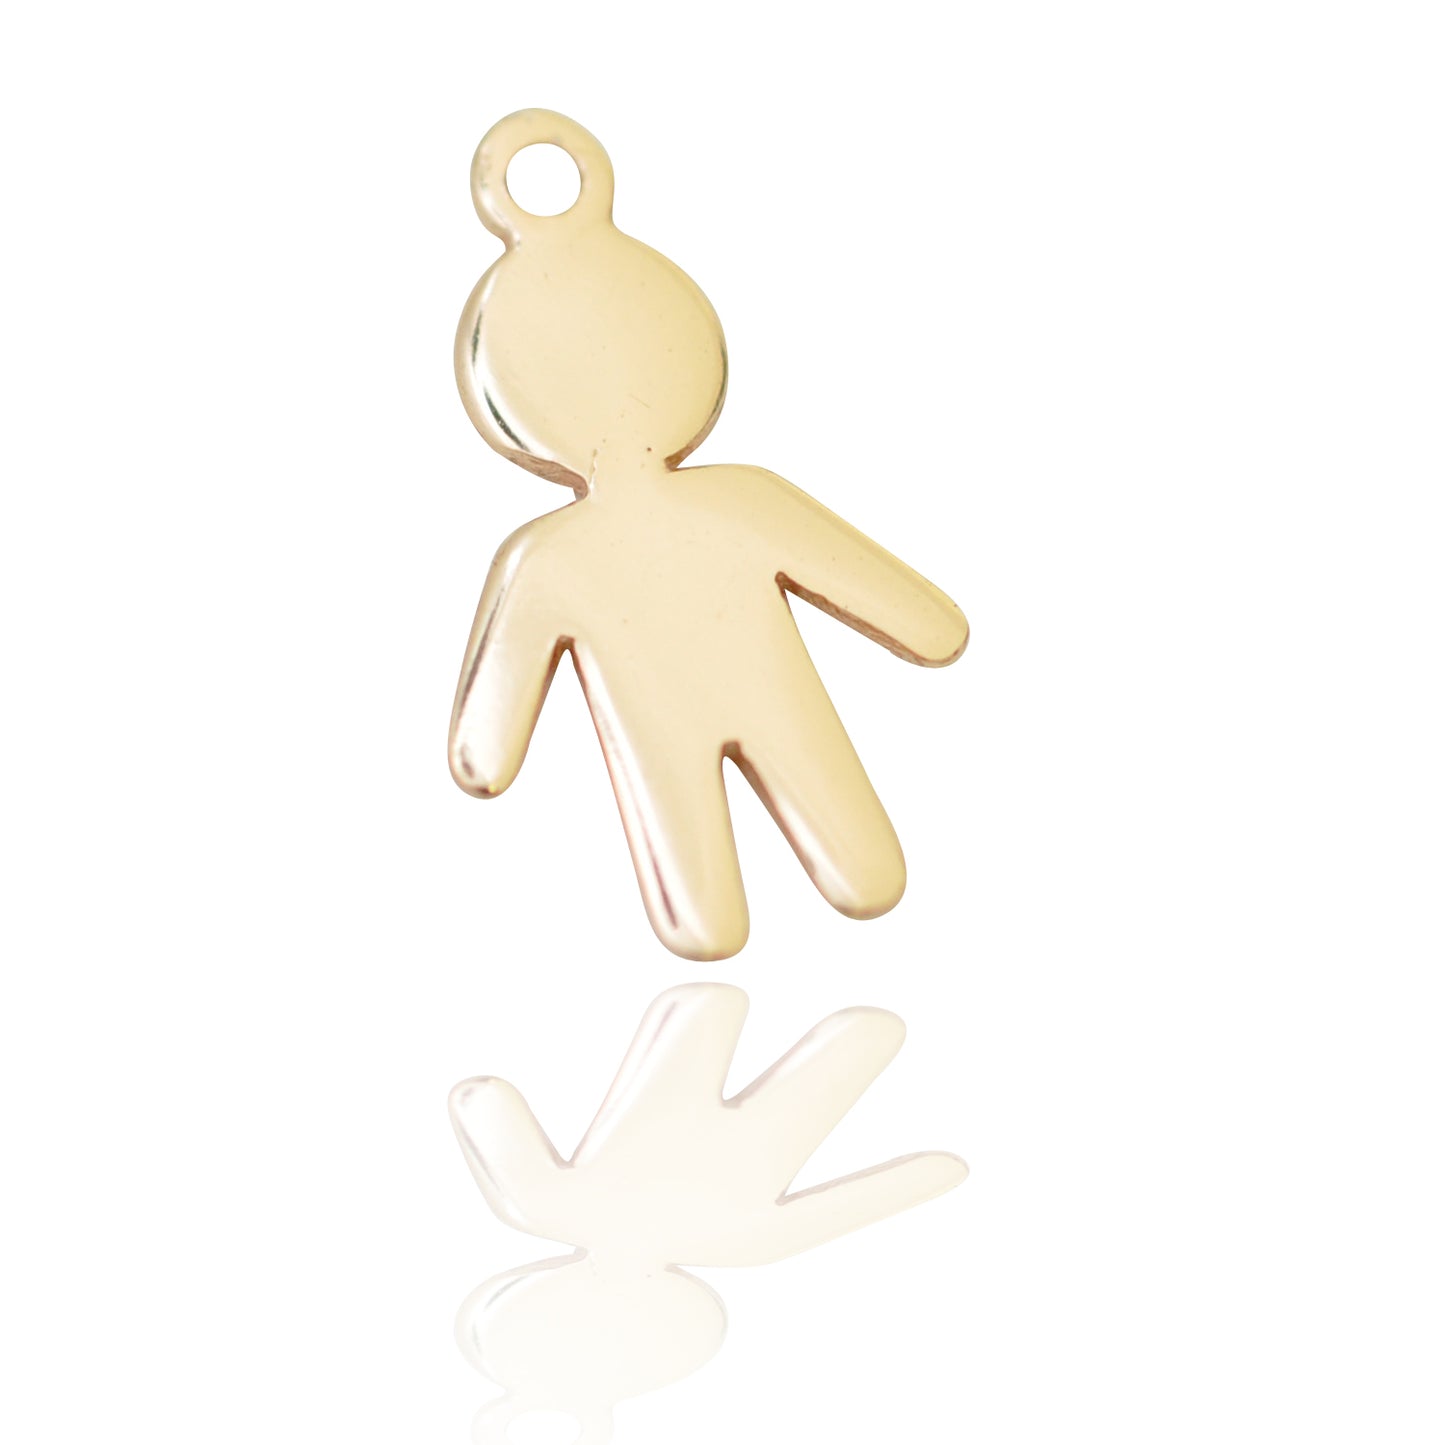 Pendant boy / 925 silver 18k rose gold plated / 12 mm